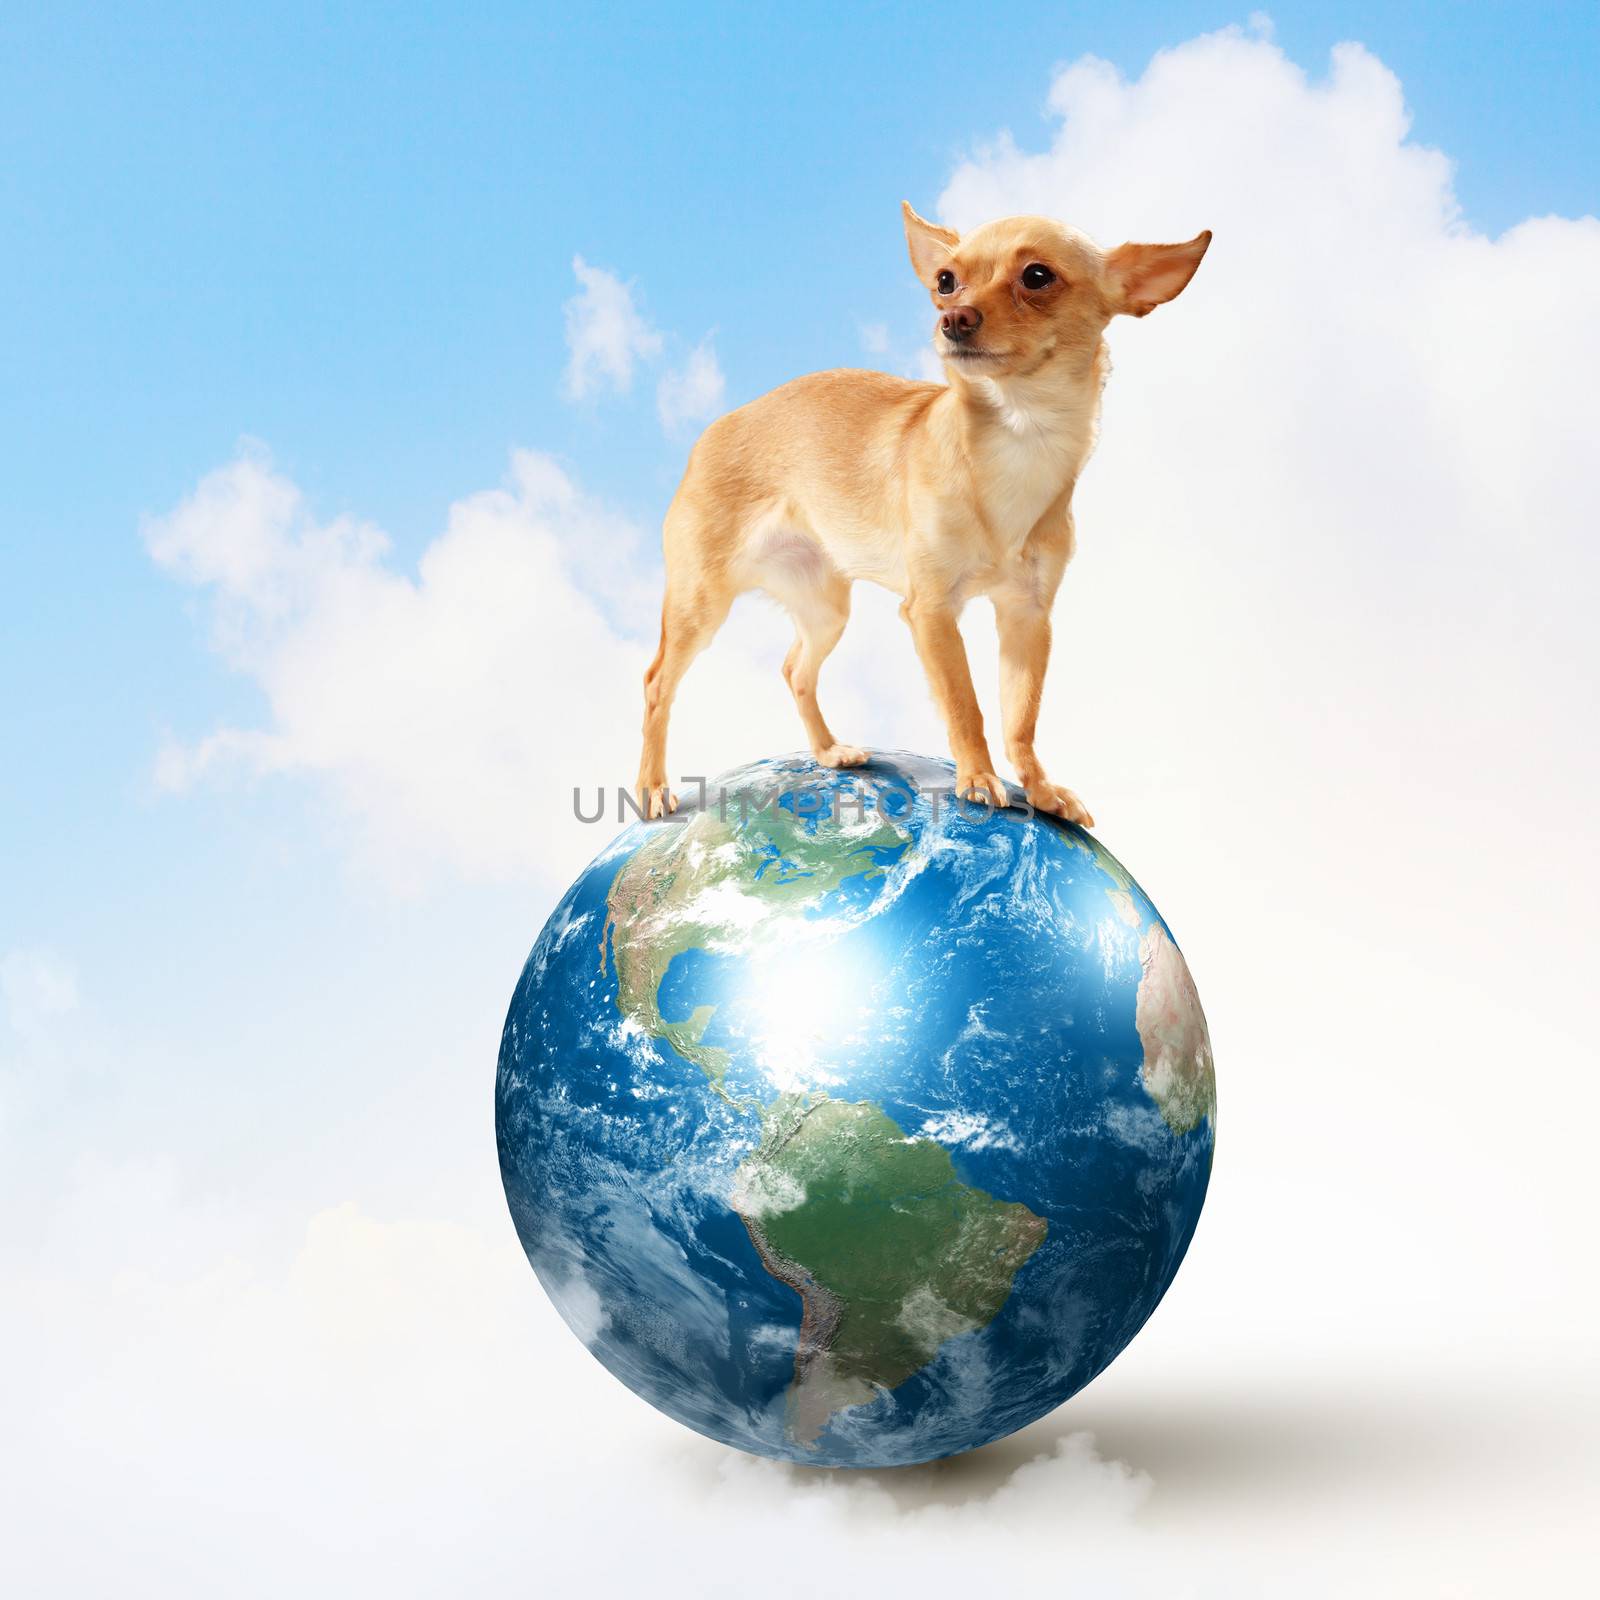 Dog with the Earth. by sergey_nivens